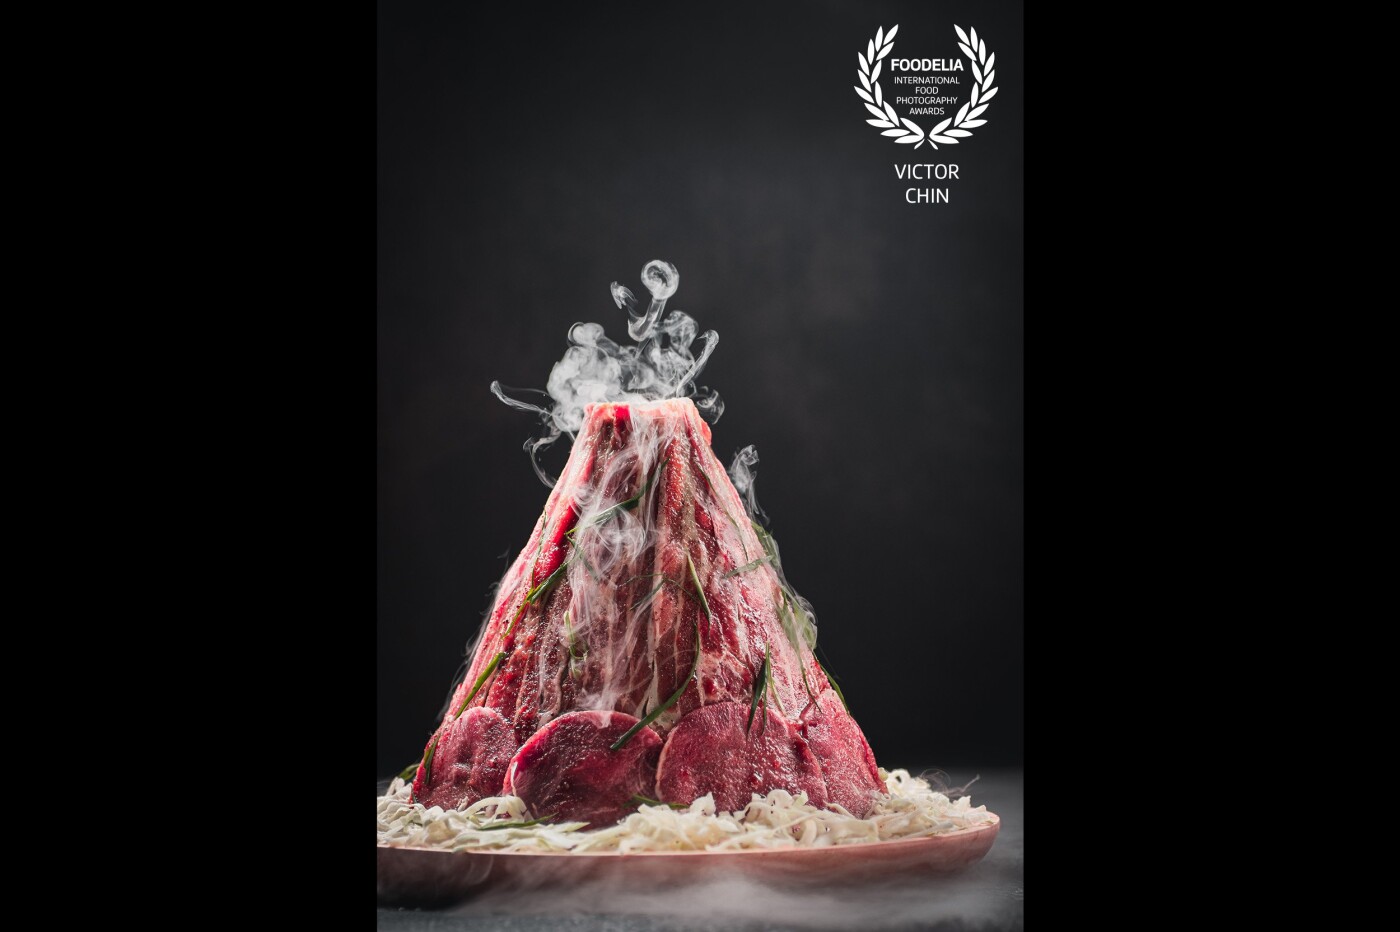 The Meatcano!<br />
<br />
The idea of arranging the meat served for a BBQ restaurant with a smoke effect that makes it looks like a volcano. That is how the Meatcano forms...Meat + Volcano.